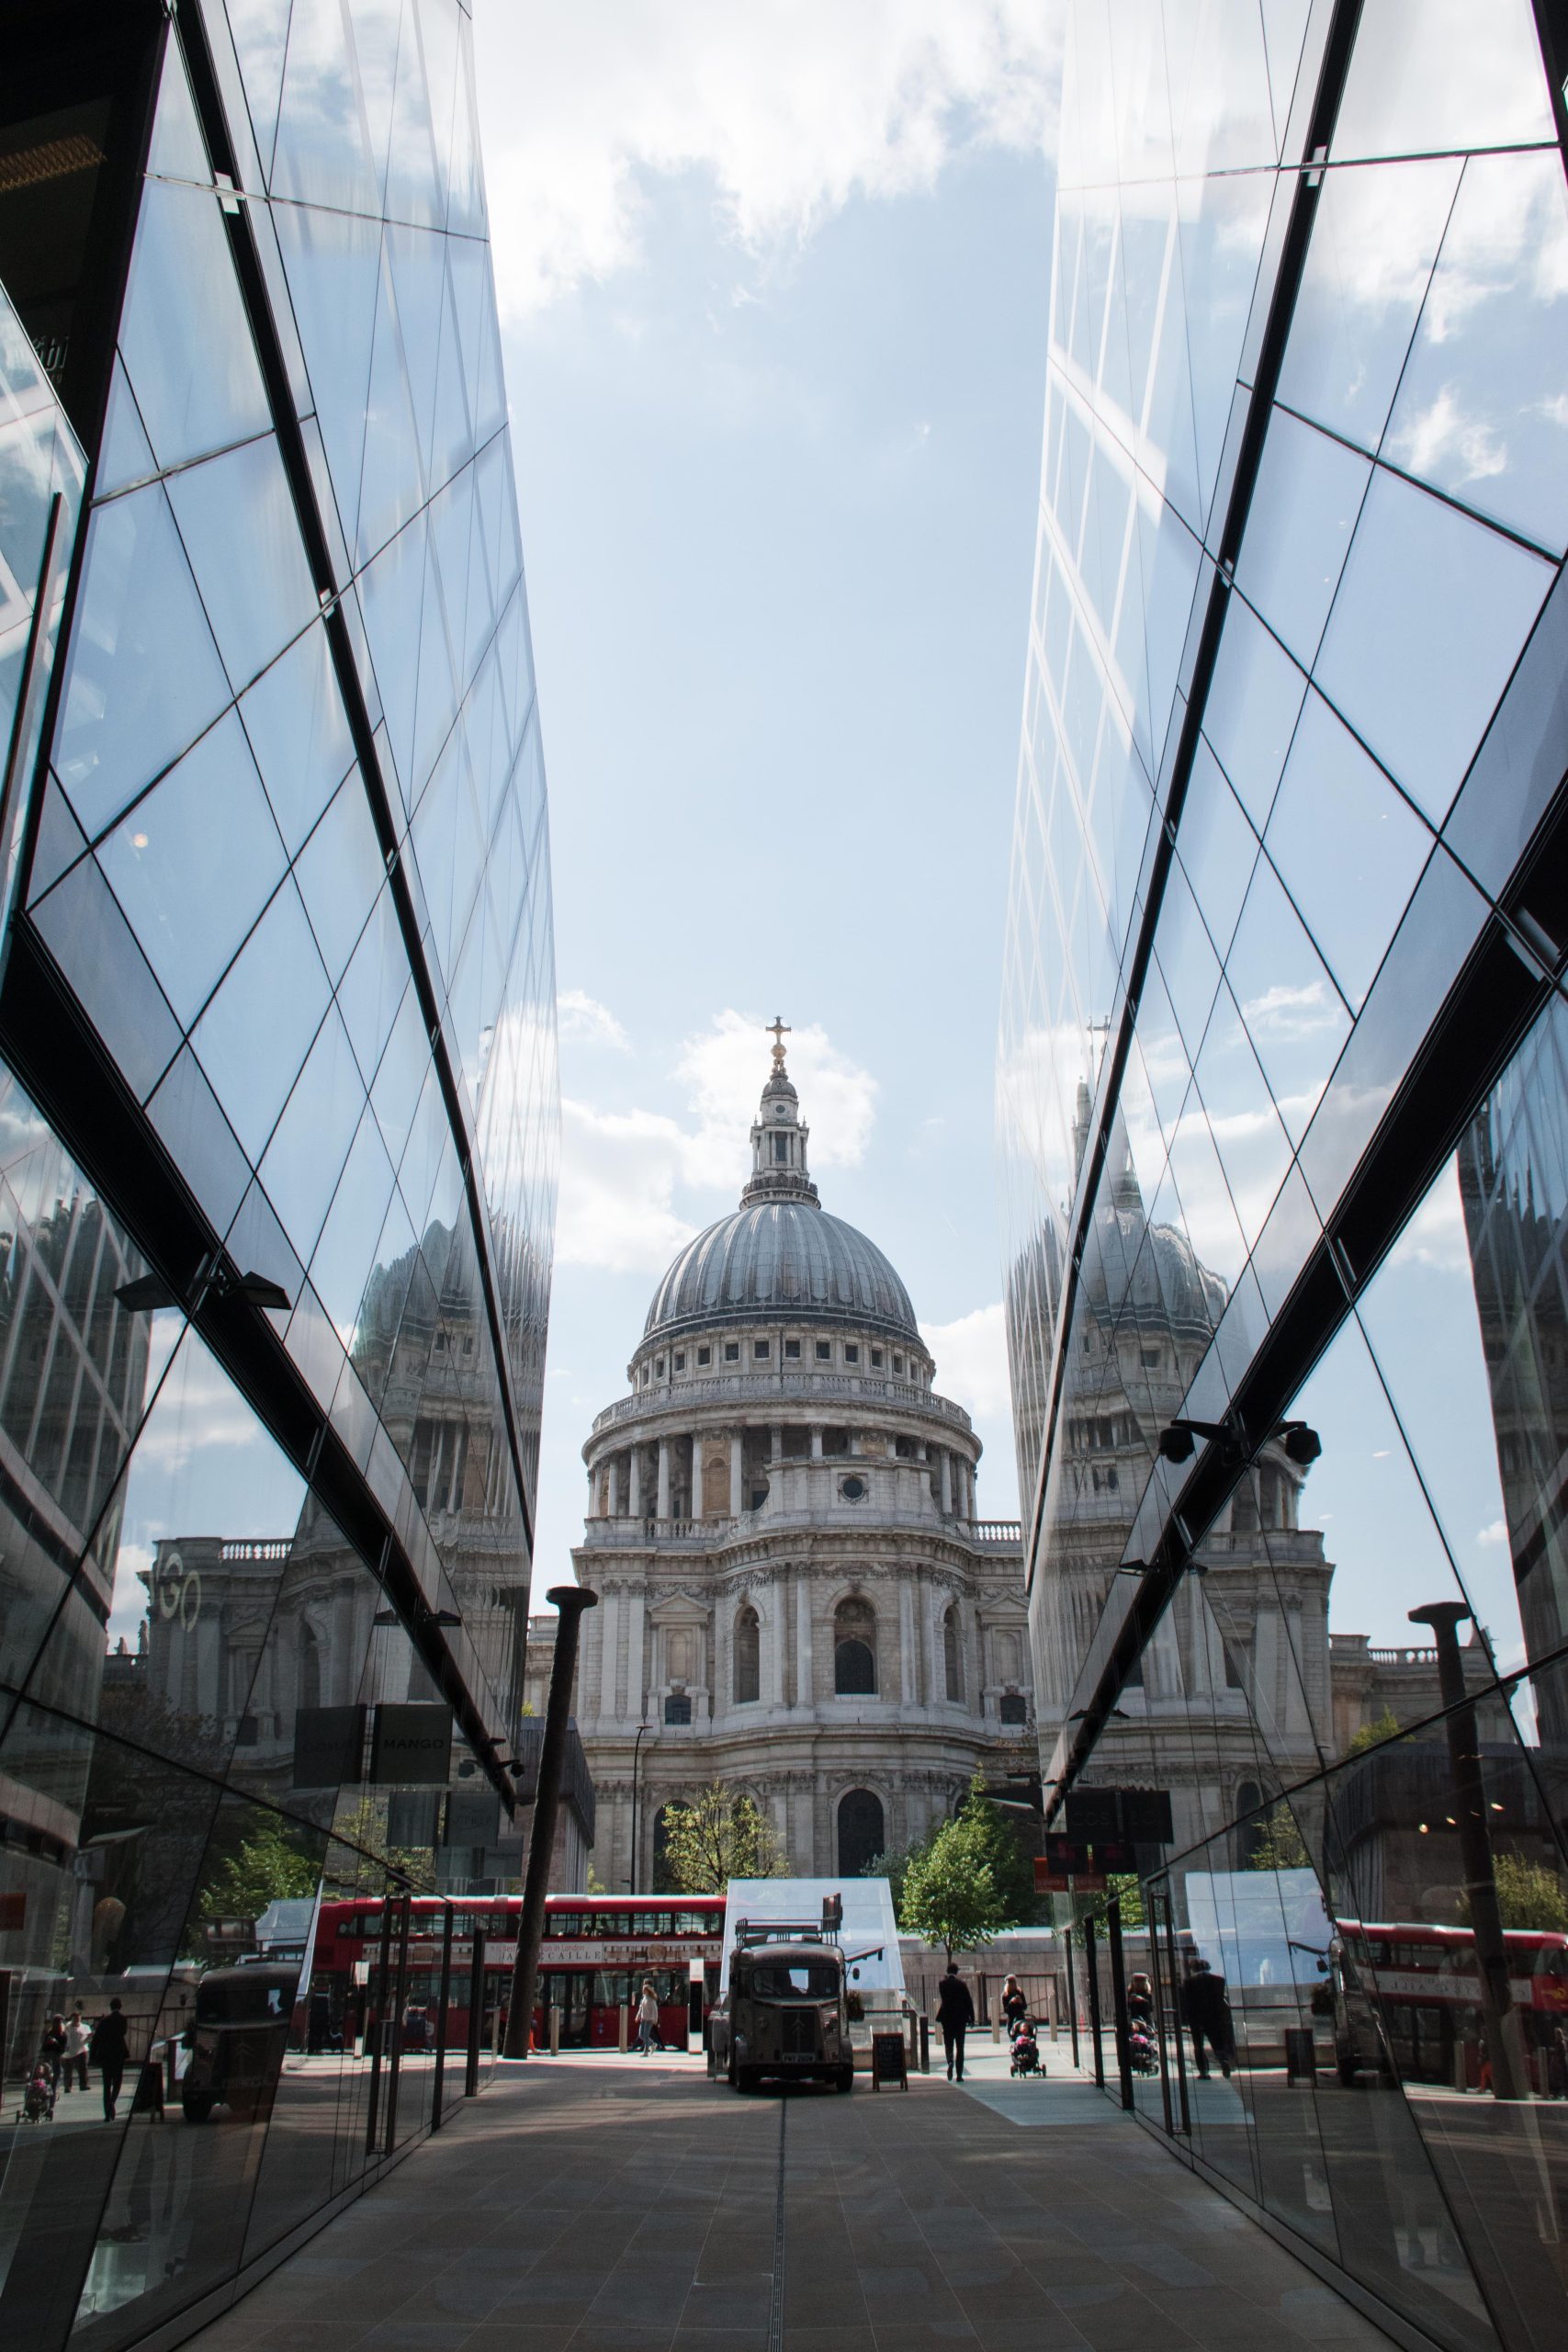 View of St Paul's from the One New Change Shopping Centre